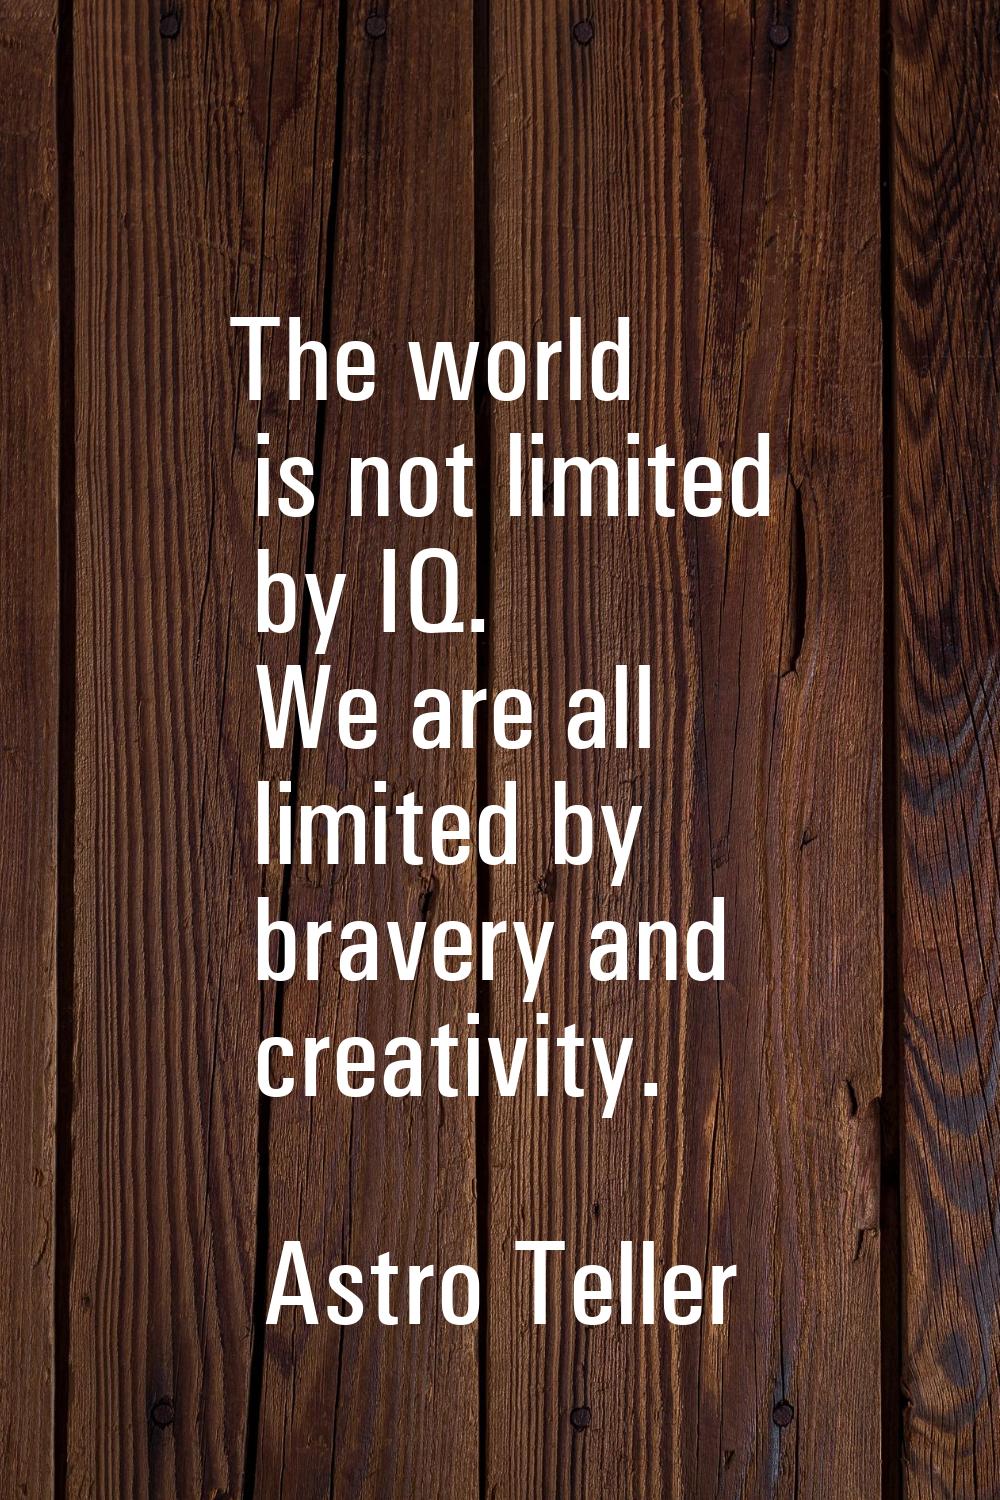 The world is not limited by IQ. We are all limited by bravery and creativity.